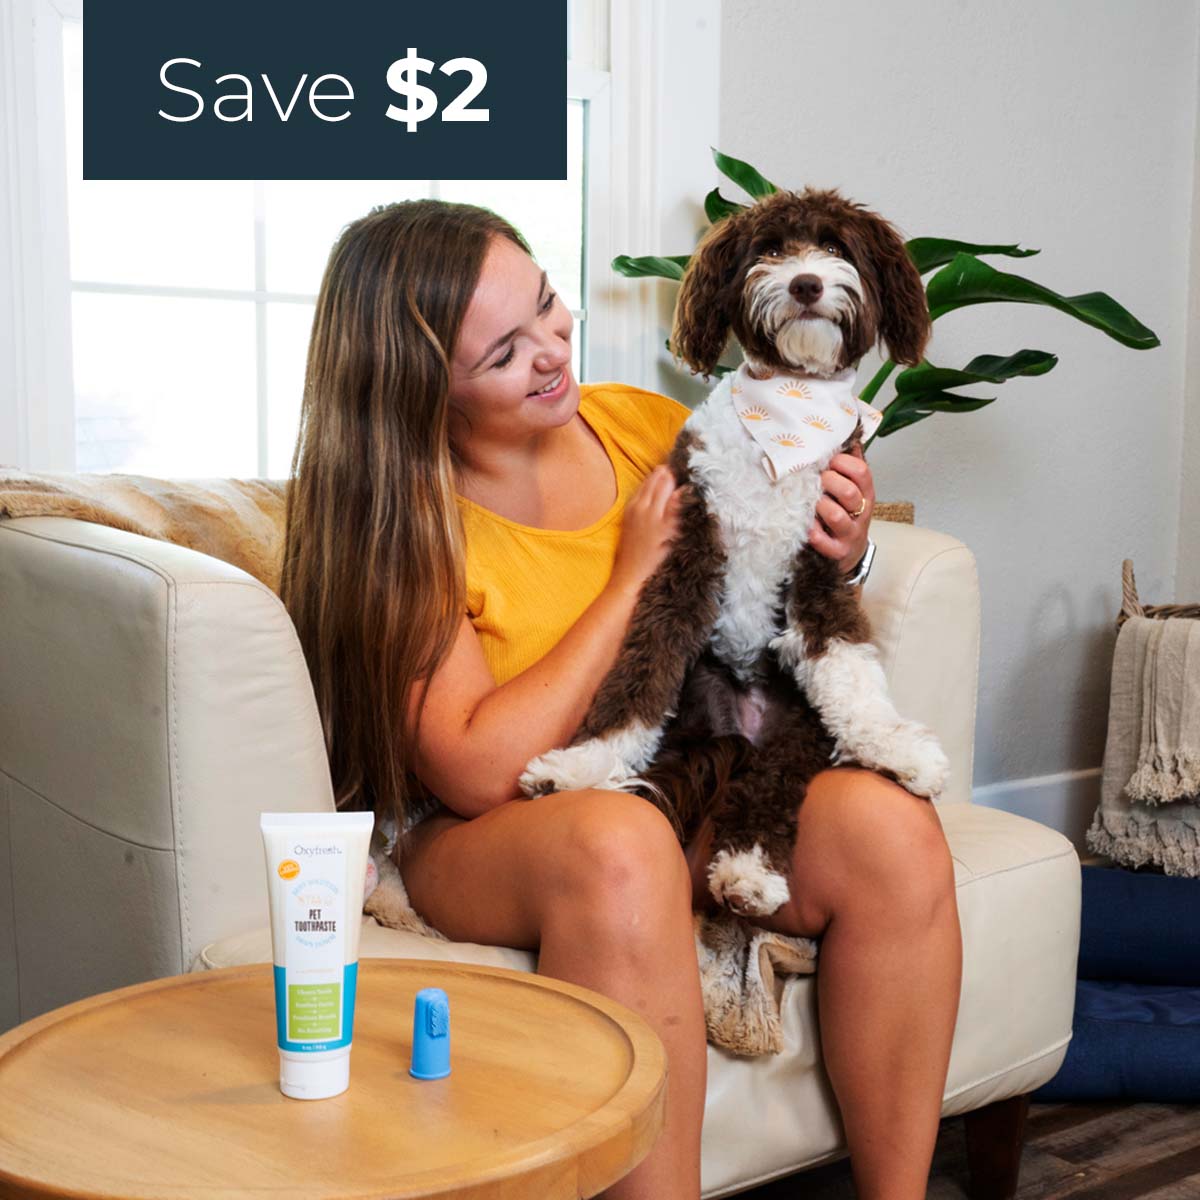 woman-holding-brown-and-white-dog-with-oxyfresh-the-best-pet-toothpaste-and-fingerbrush-in-a-light-modern-living-room